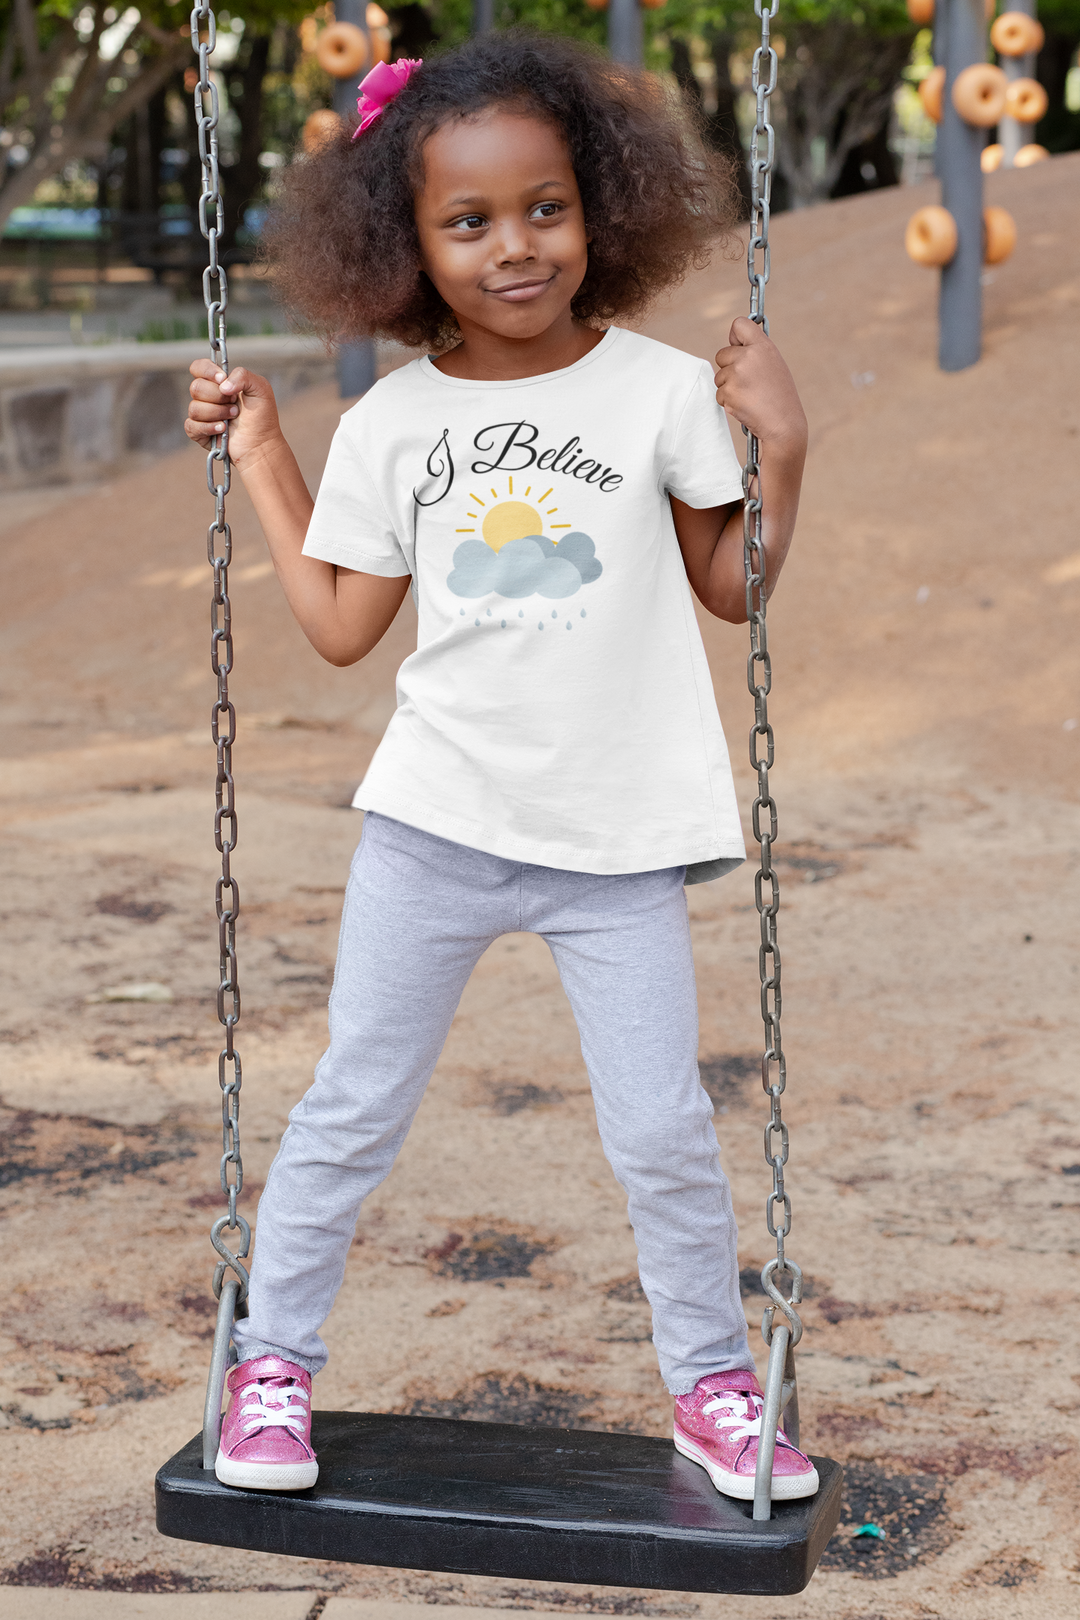 I Belive. Gospel song graphic t shirt for toddlers and kids.